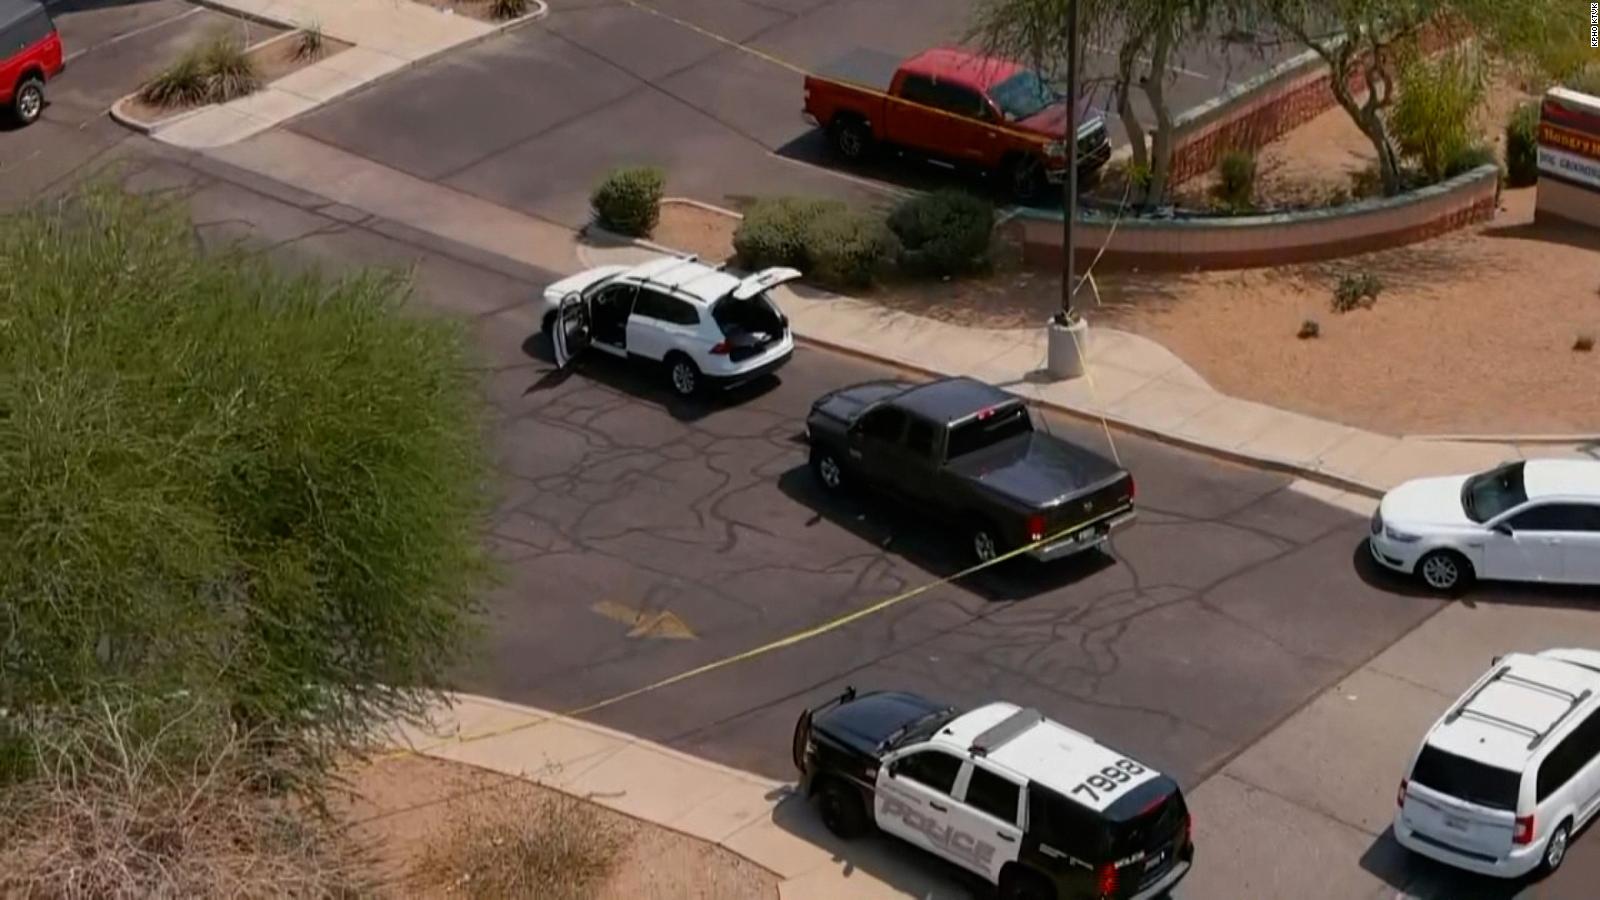 Phoenix Arizona Shooting Police Identify Suspect In Connection With Multiple Shootings Cnn